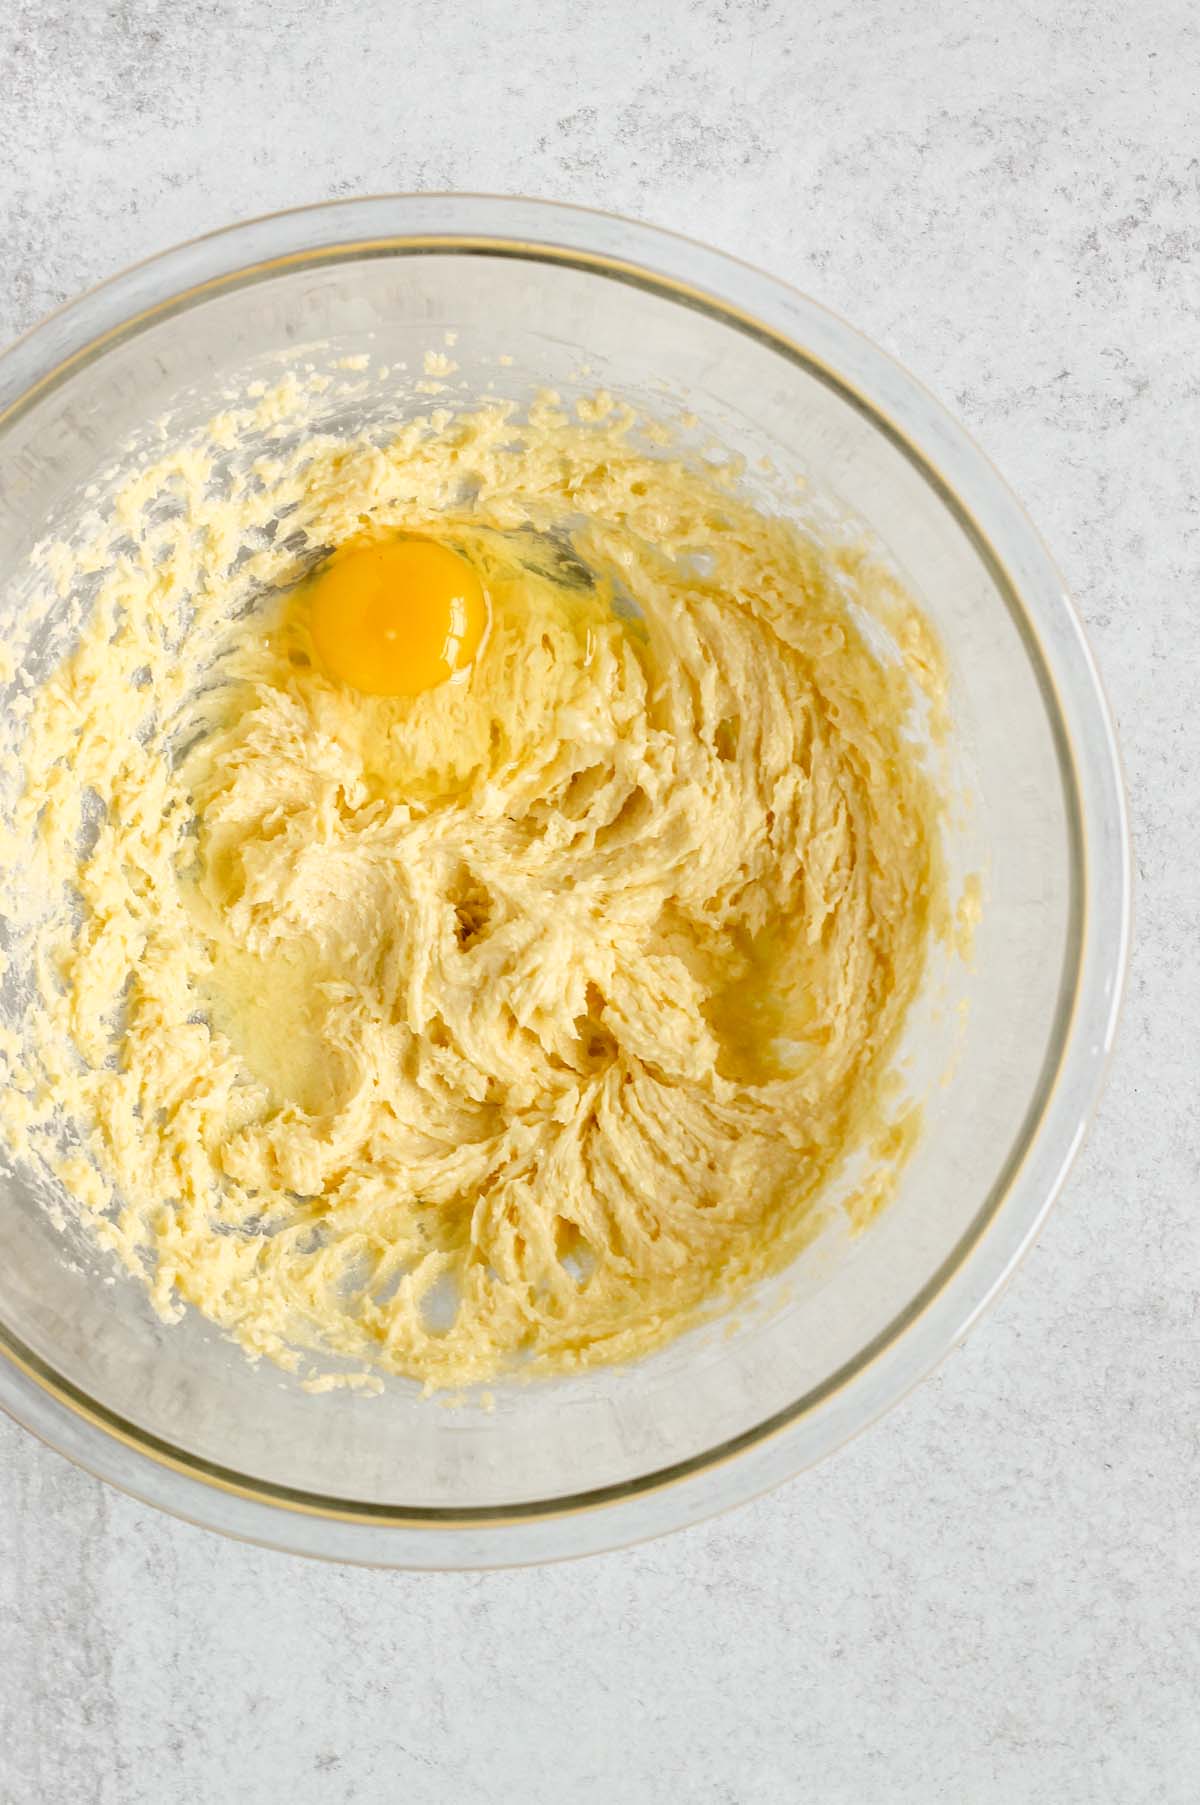 Butter and sugar creamed with an egg added in a glass mixing bowl.